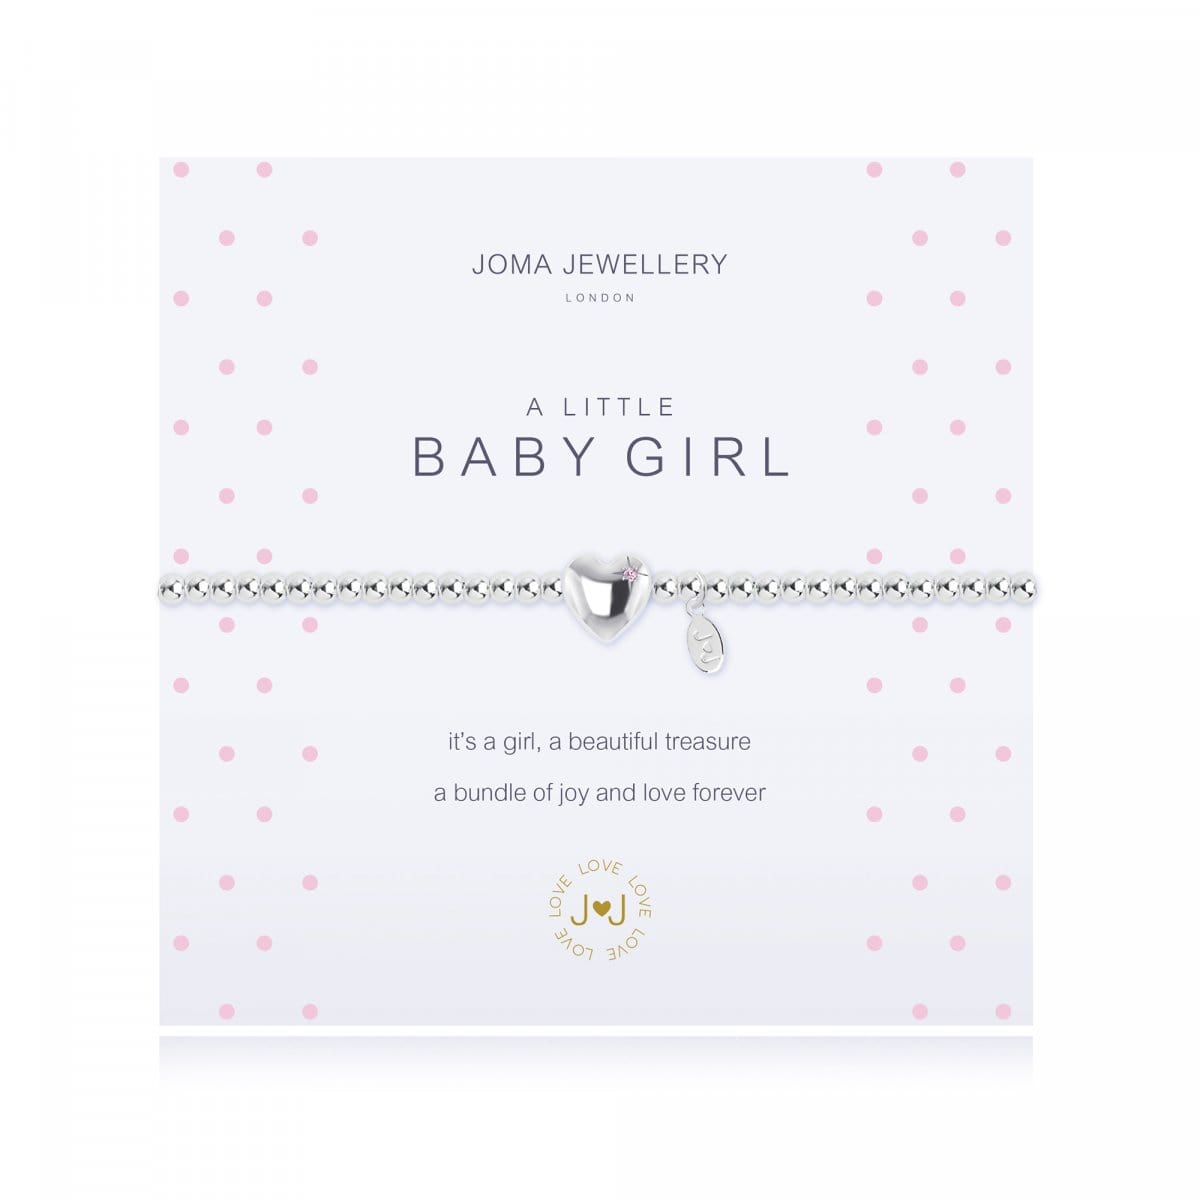 Silver bracelet with heart charm on a sentiment card for a little baby girl.